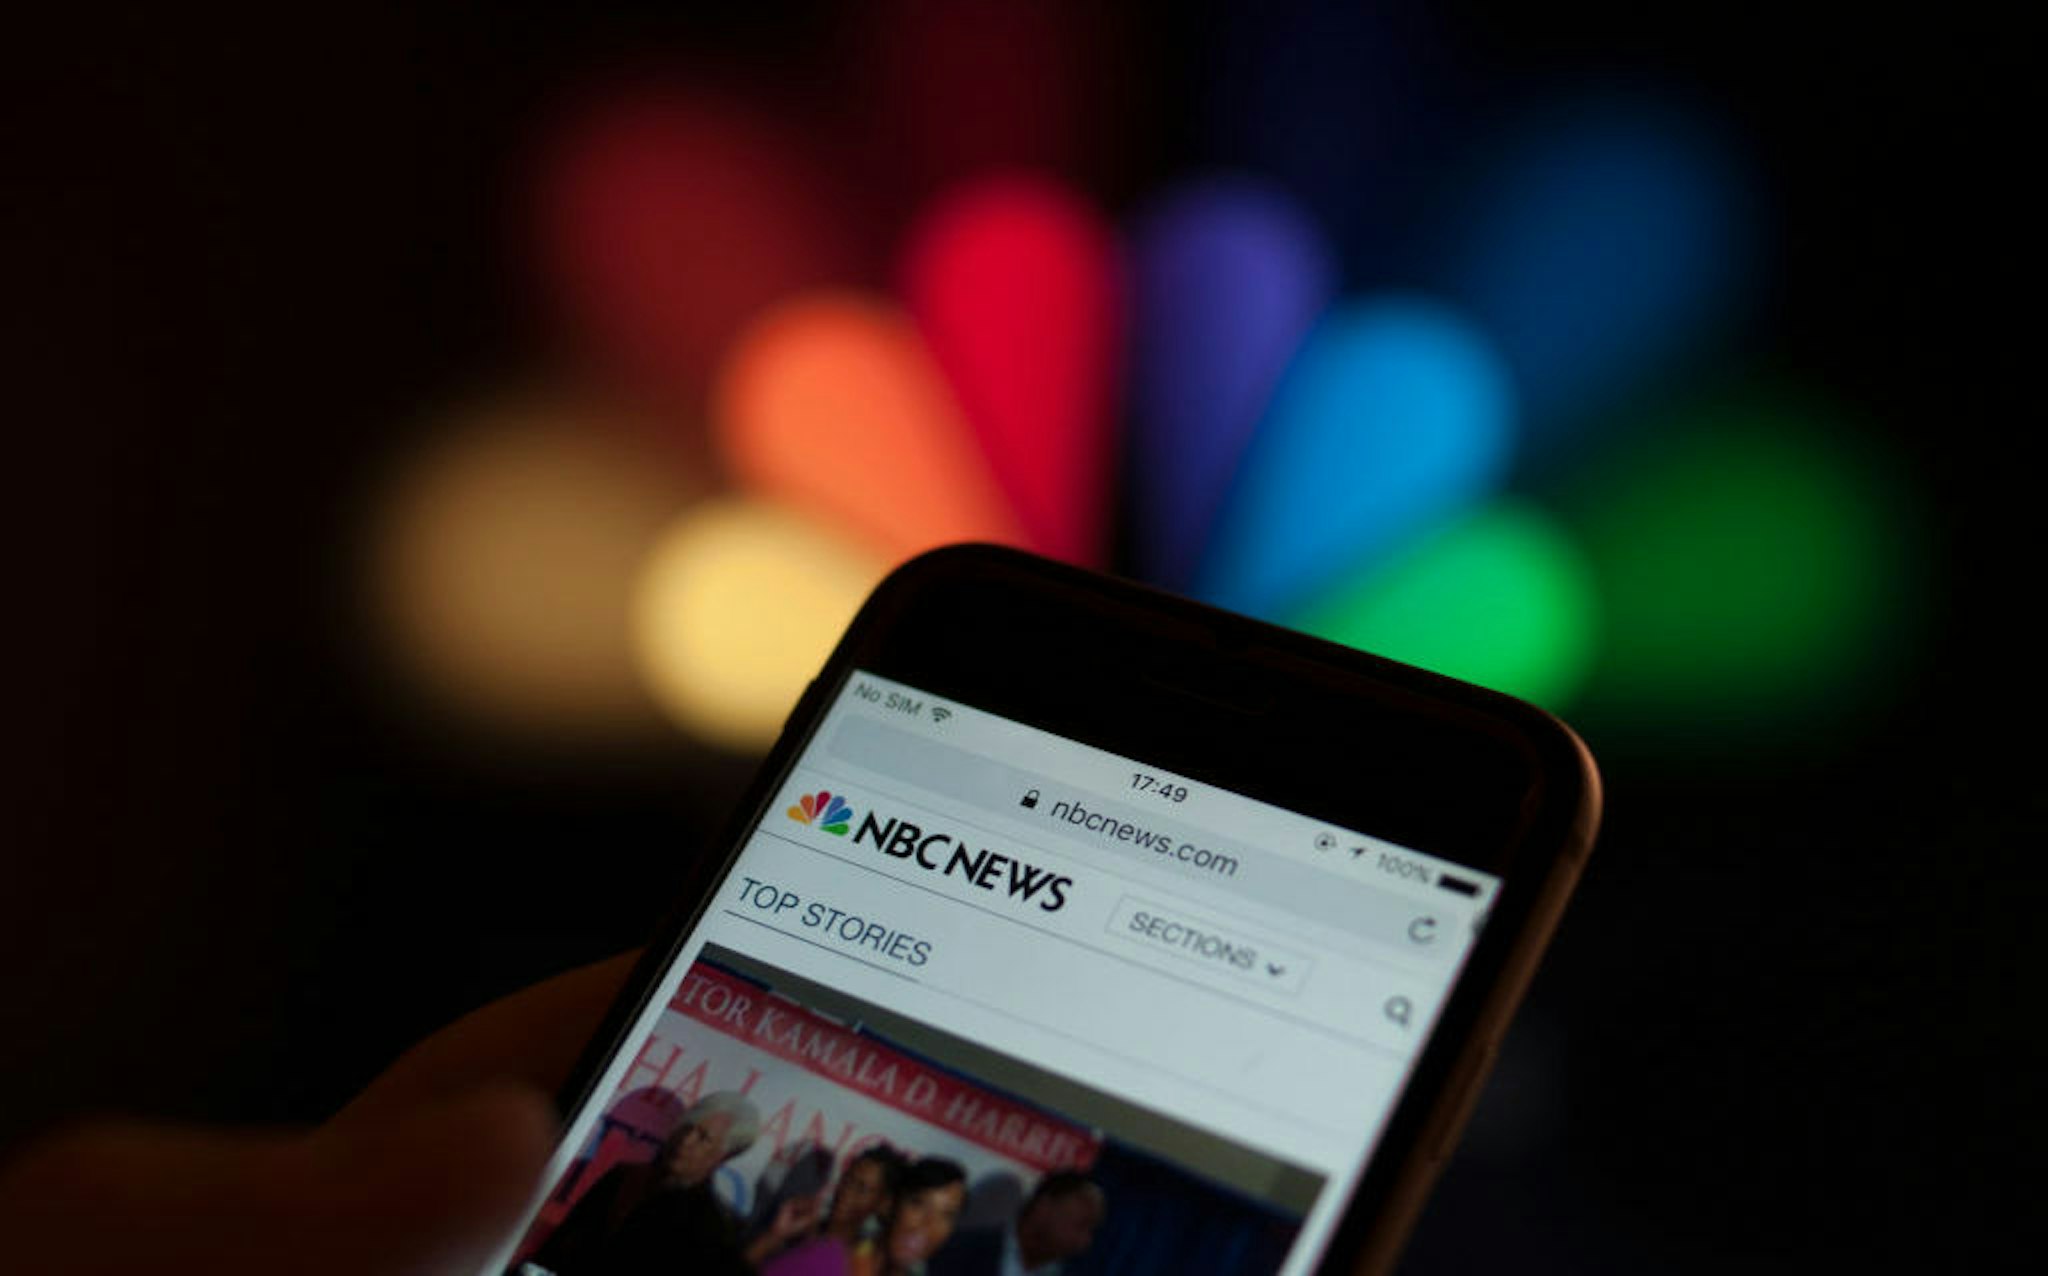 The NBC news app is seen on a smartphone in this photo illustration on December 5, 2017. (Photo by Jaap Arriens/NurPhoto)